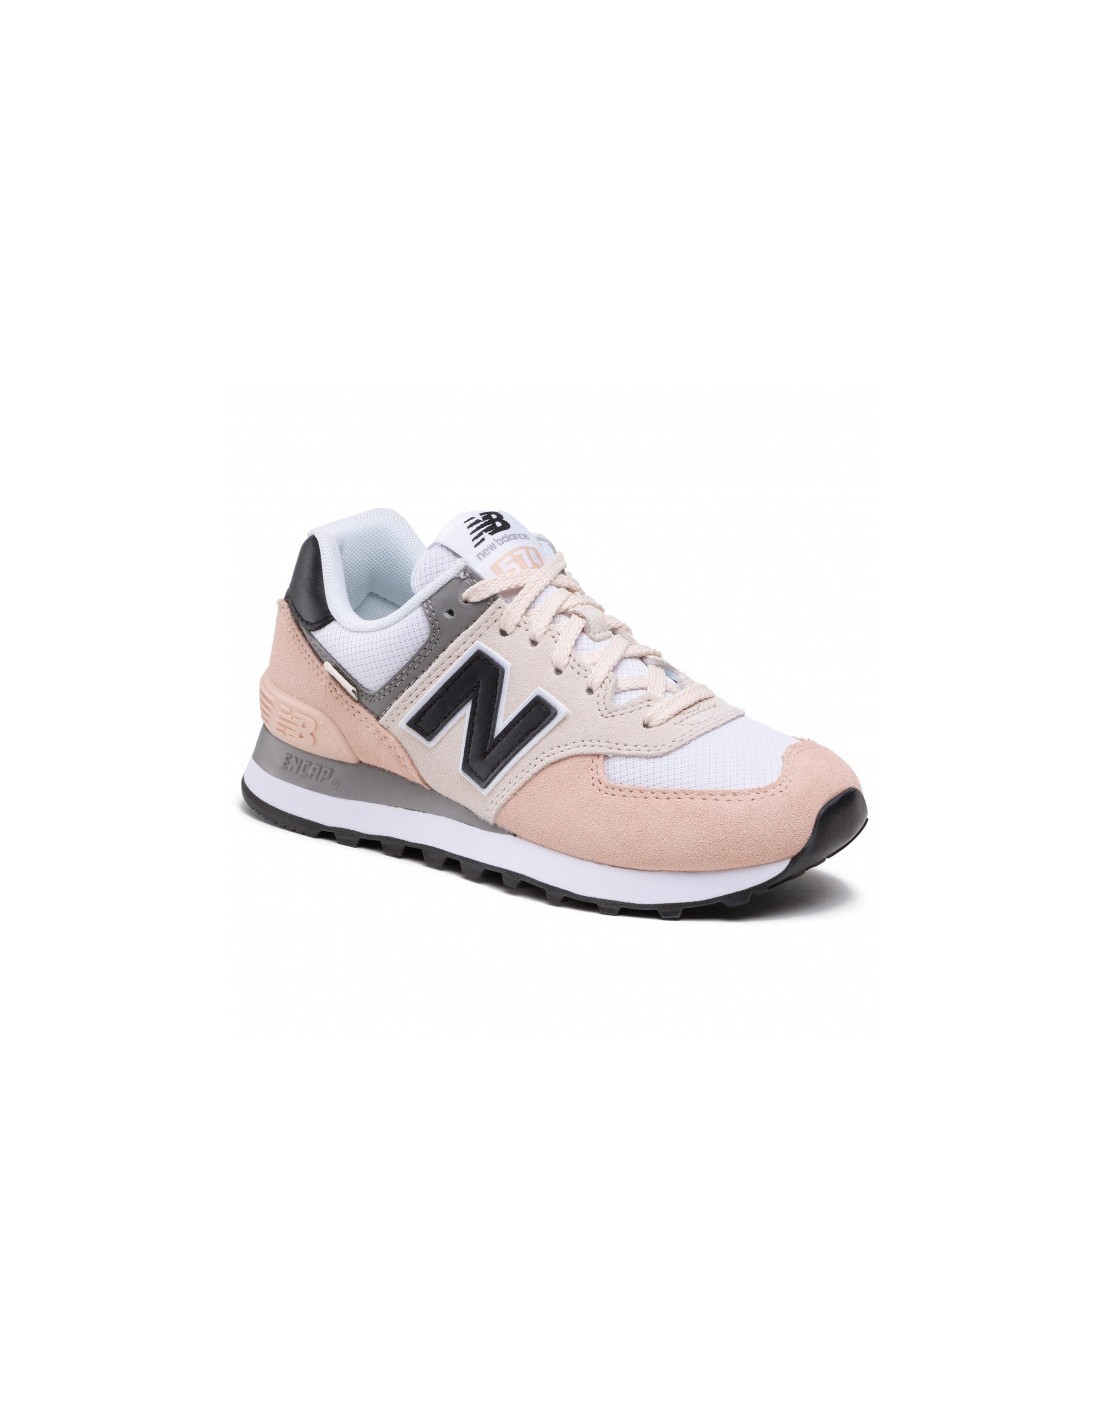 CHAUSSURES NEW WL574SK2 FEMME